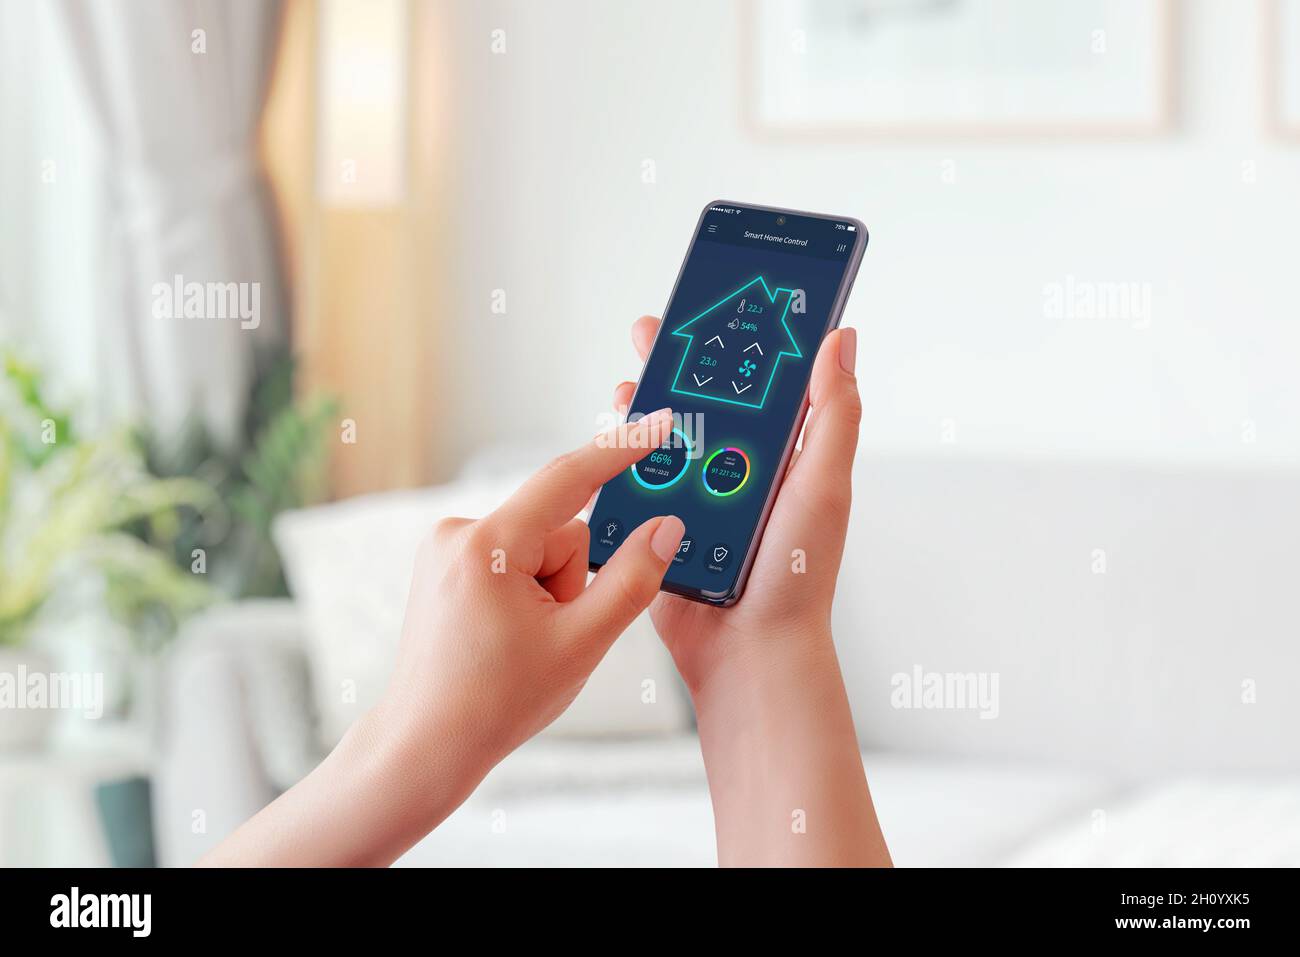 Girl regulates the lighting of her home with smart mobile phone app. Living room interior in background Stock Photo